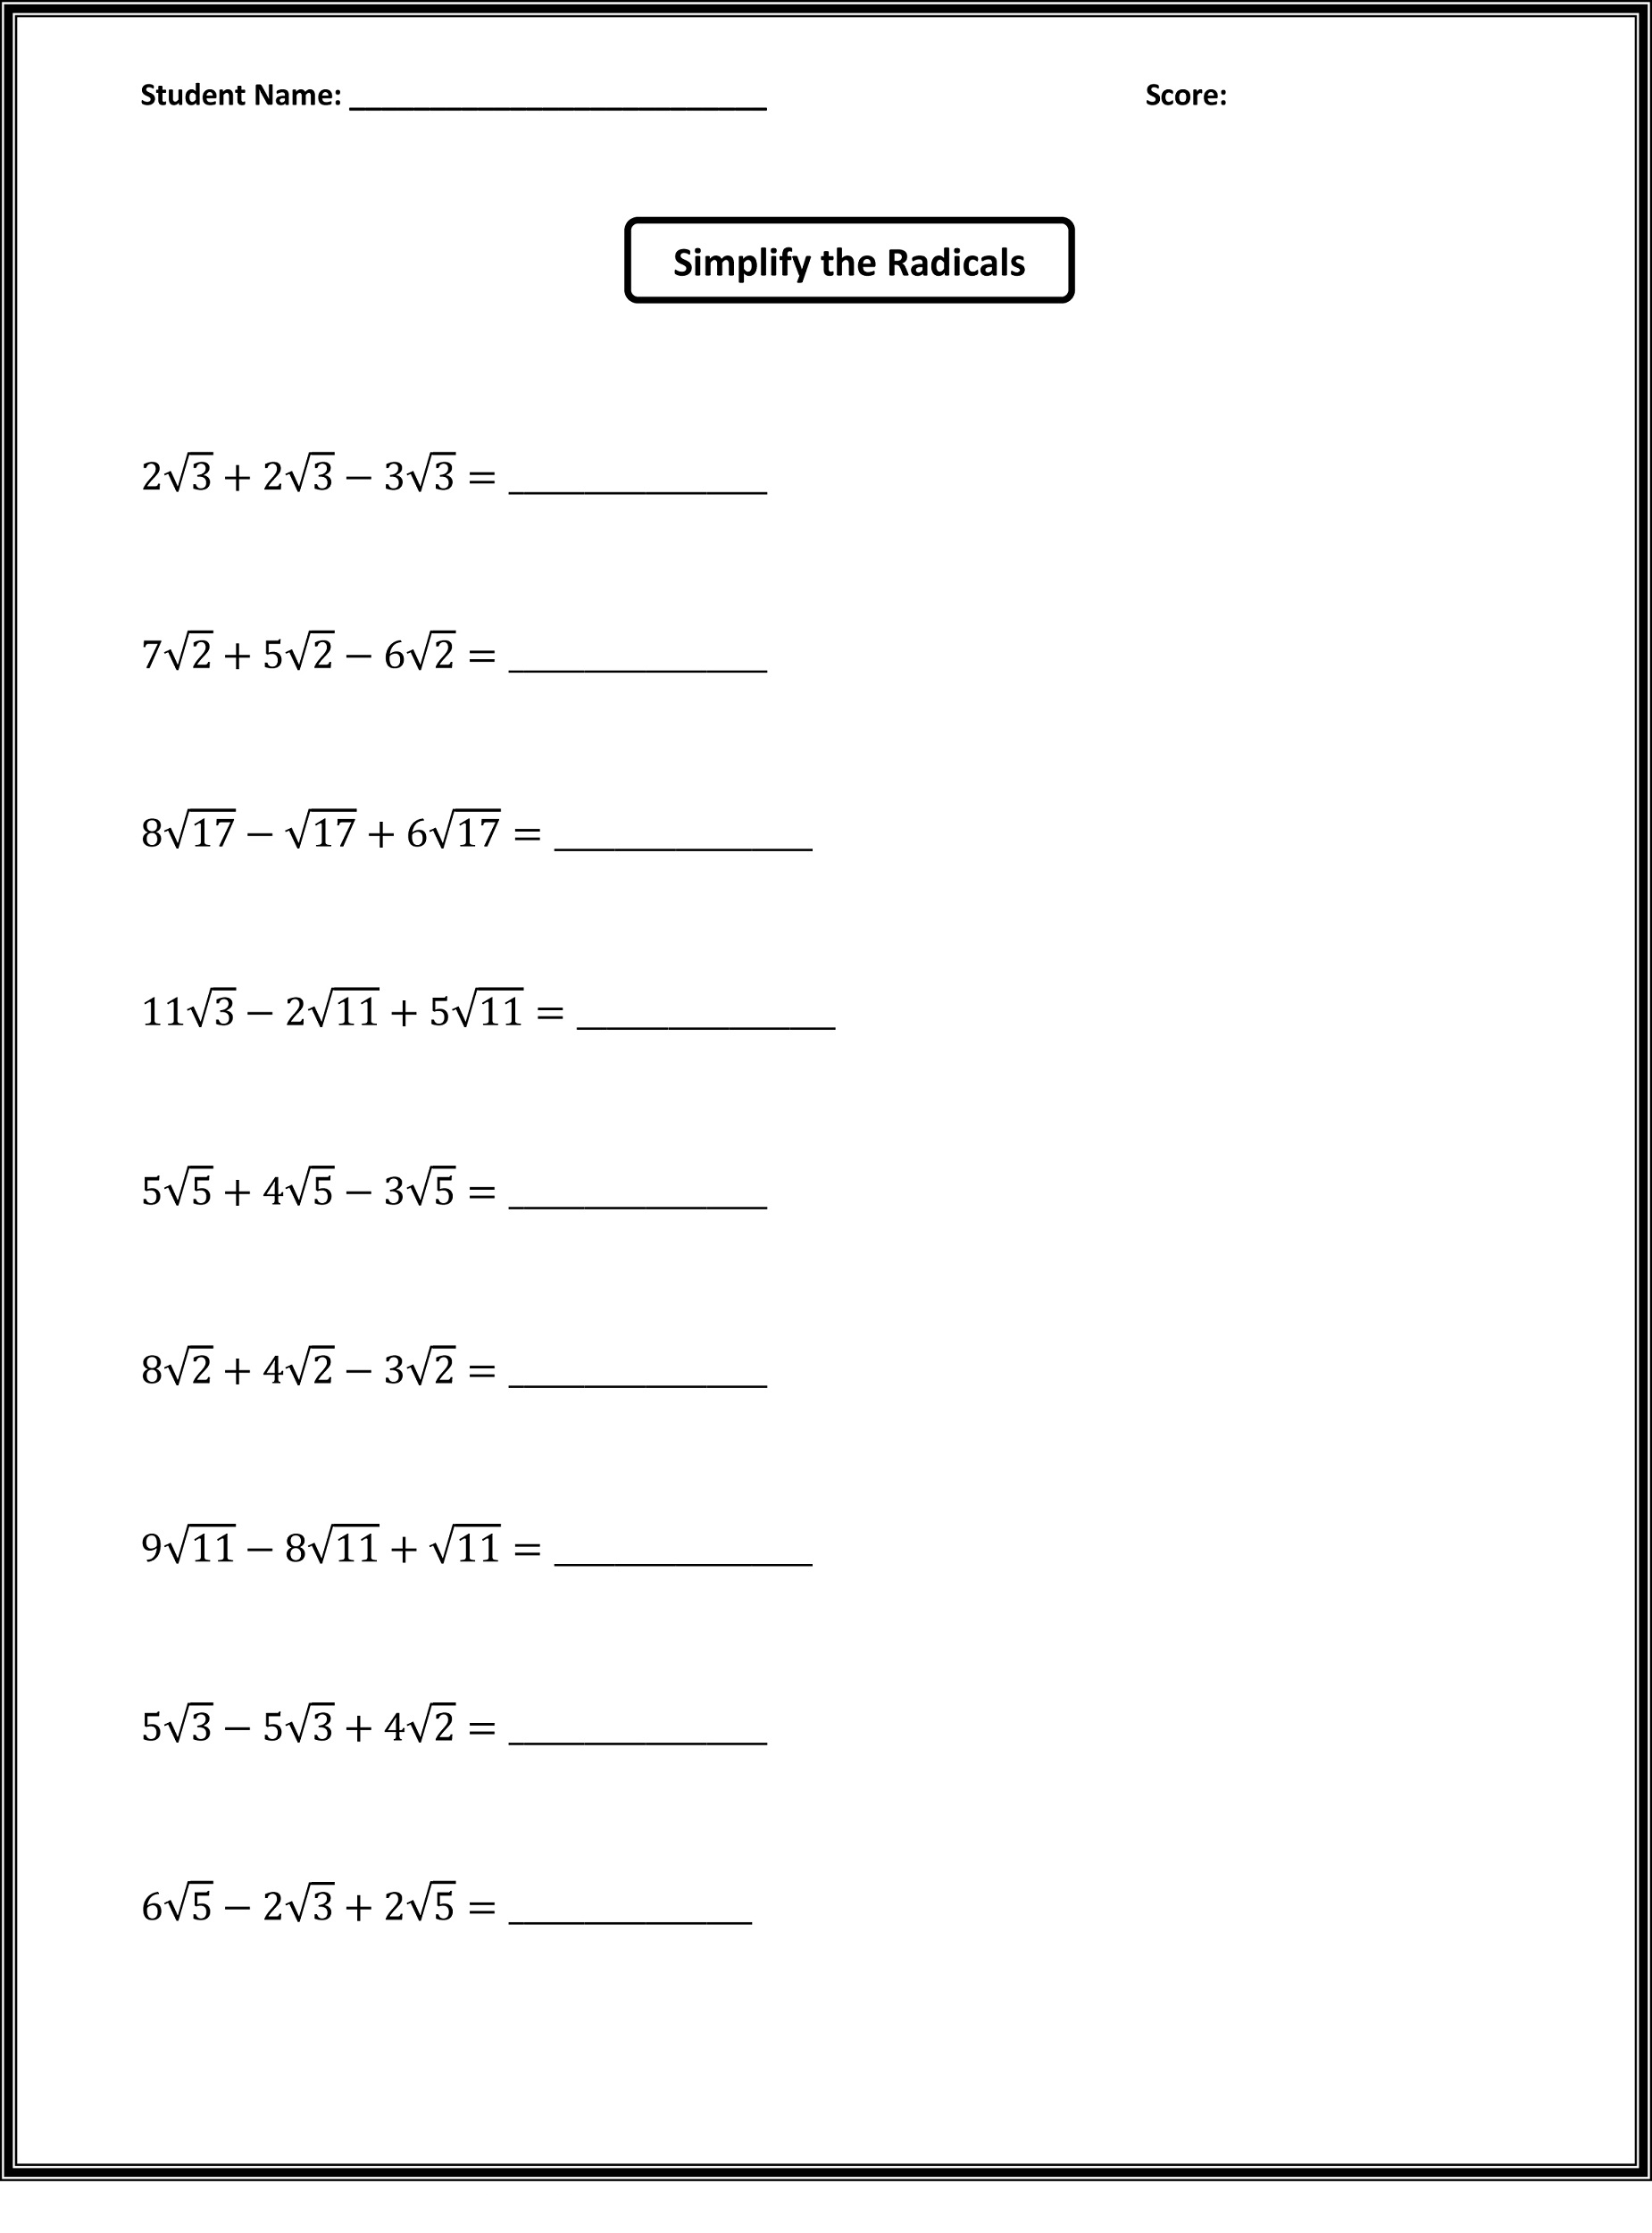 view-free-math-worksheets-for-grade-6-algebra-gif-the-math